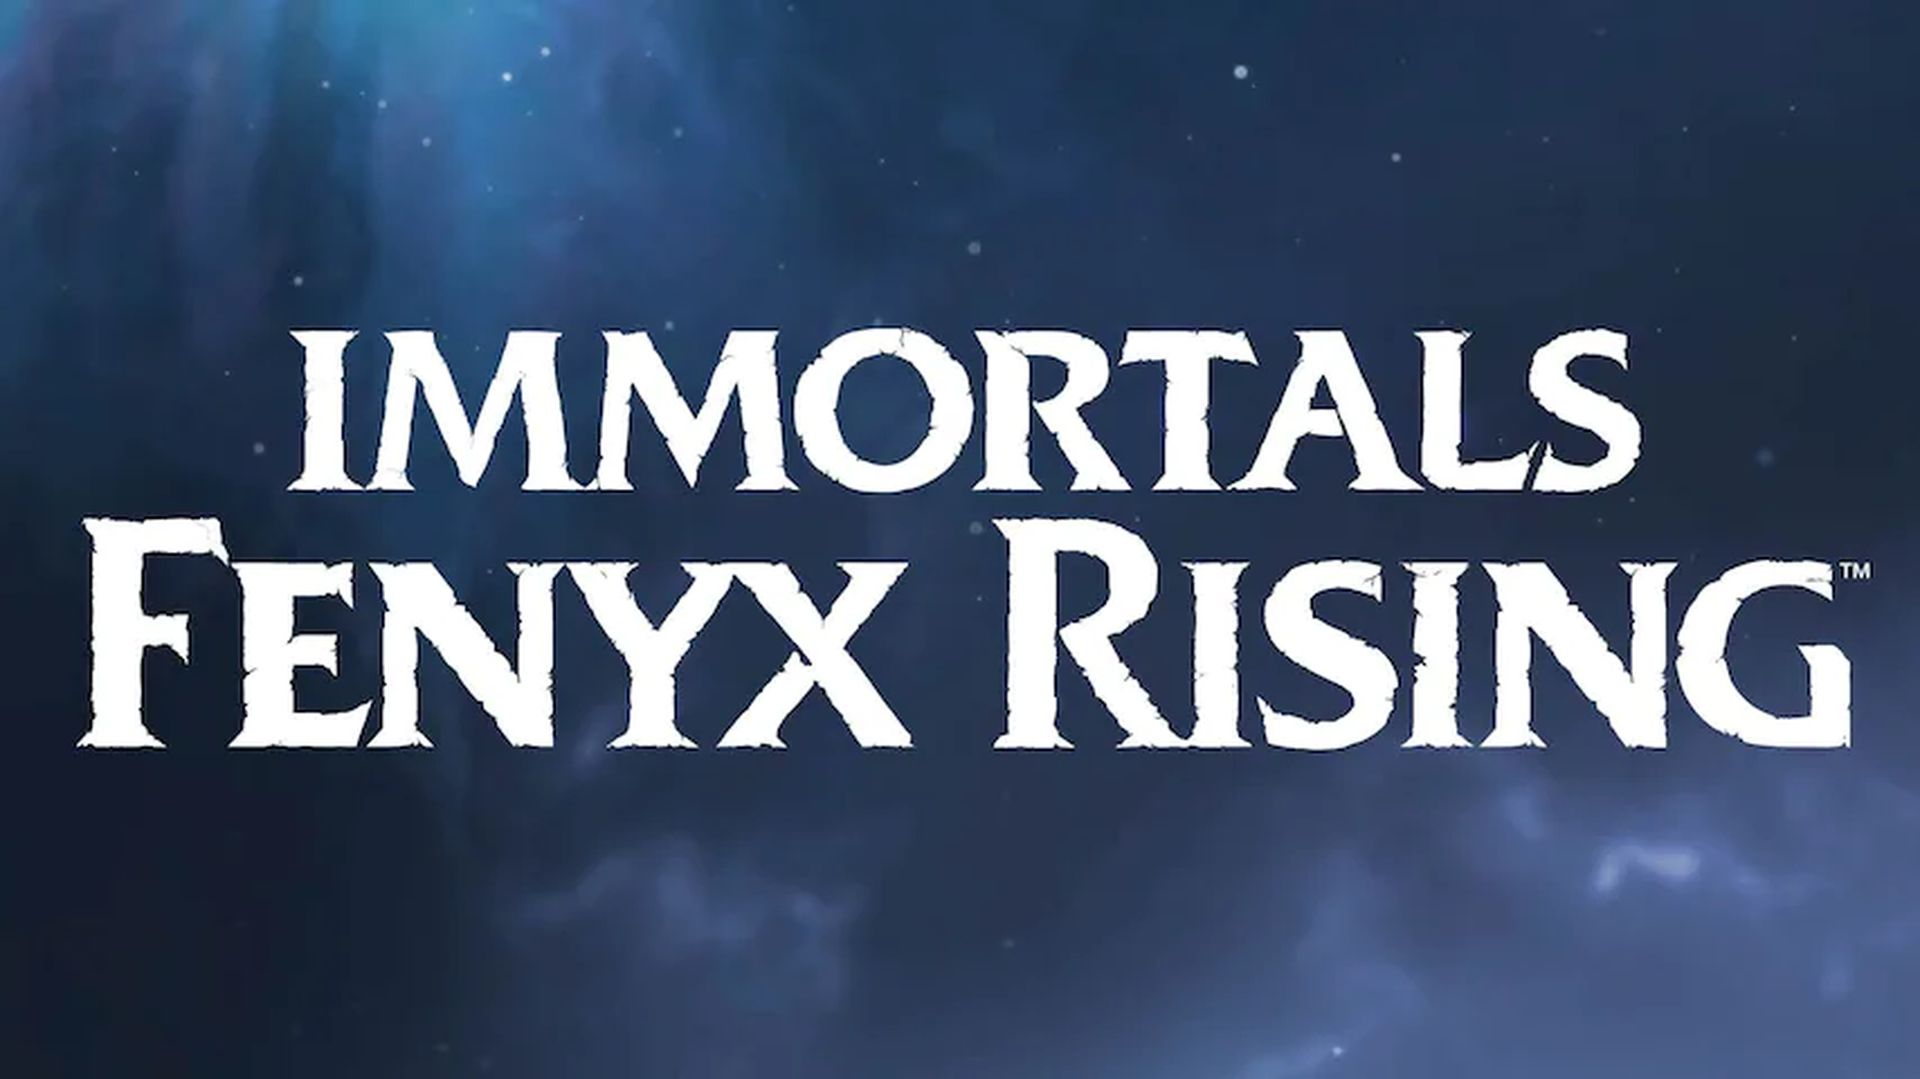 In this article, we are going to be covering Immortals Fenyx Rising codes in 2022 so you can get some free items to use in the game. 